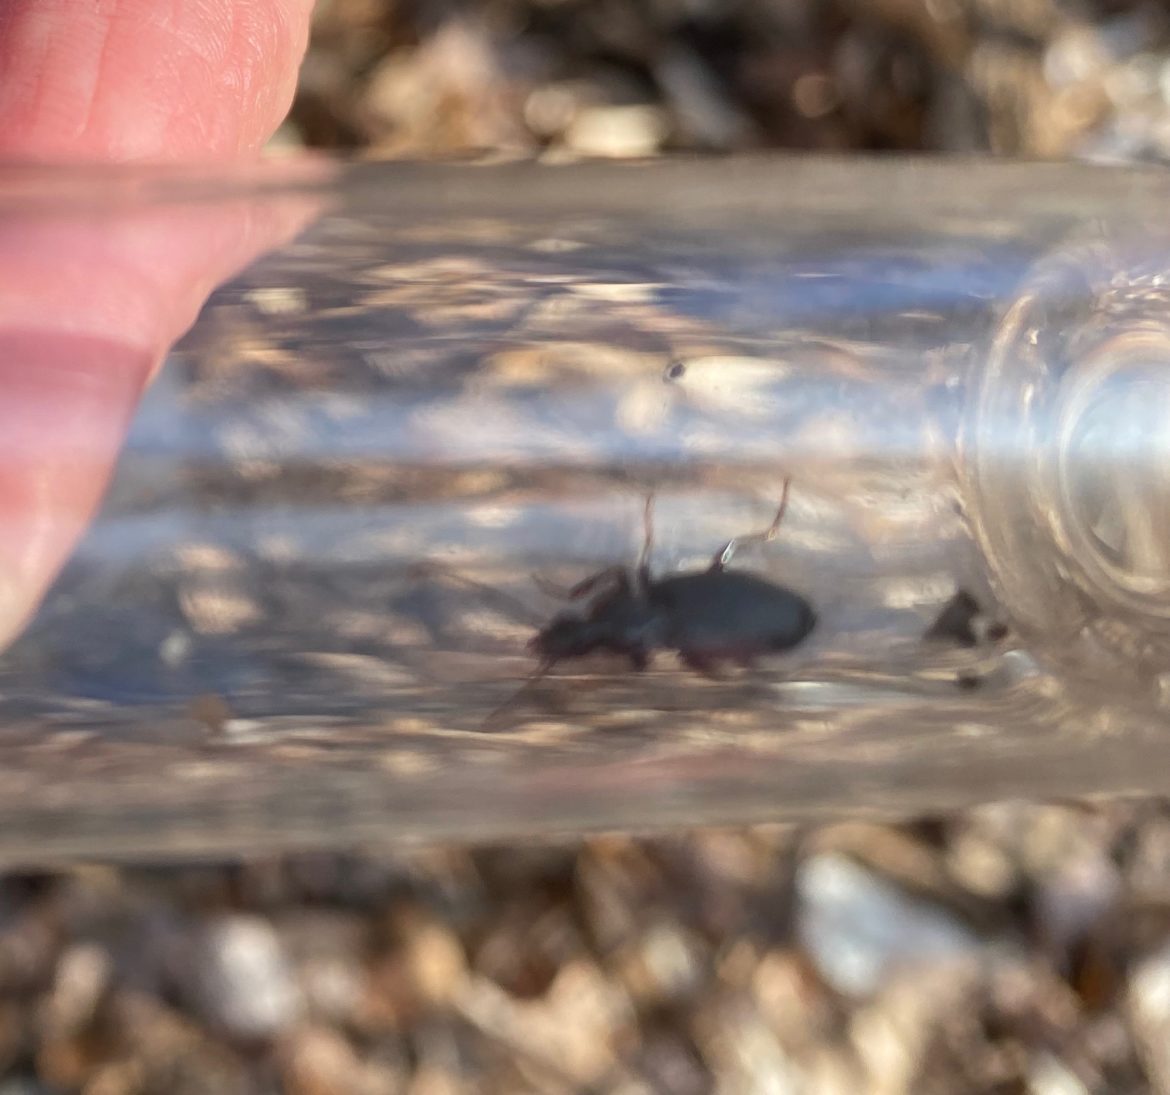 A ground beetle collected from under a log